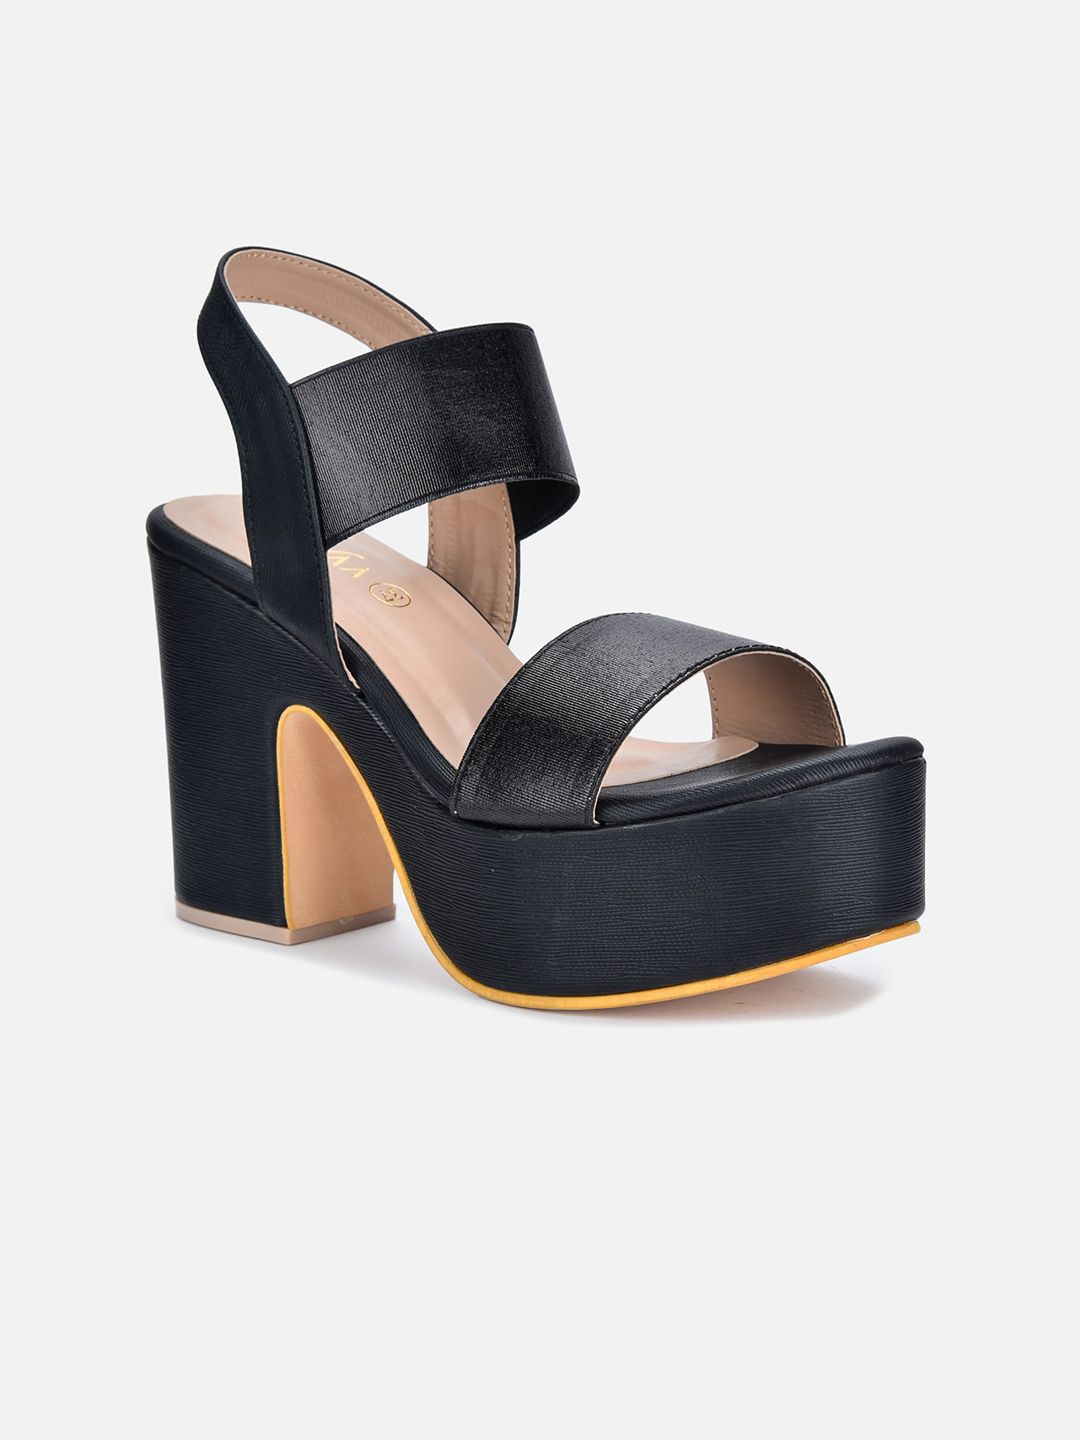 VALIOSAA Black Party Block Sandals with Buckles Price in India